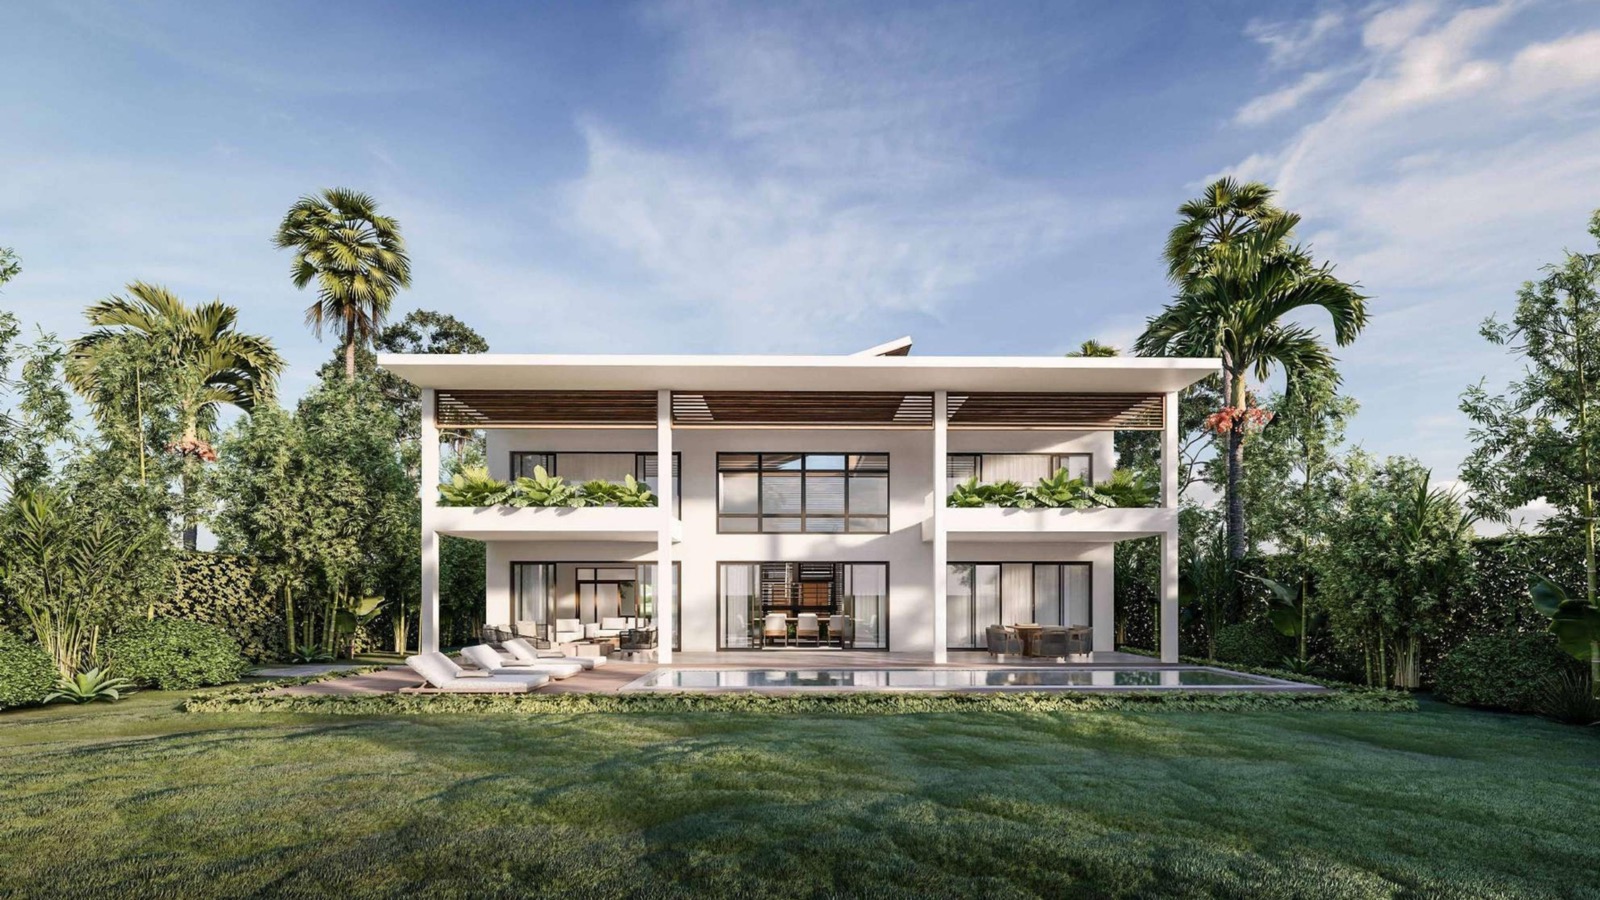 Villas for sale in cap cana, punta cana, dominican republic with golf views